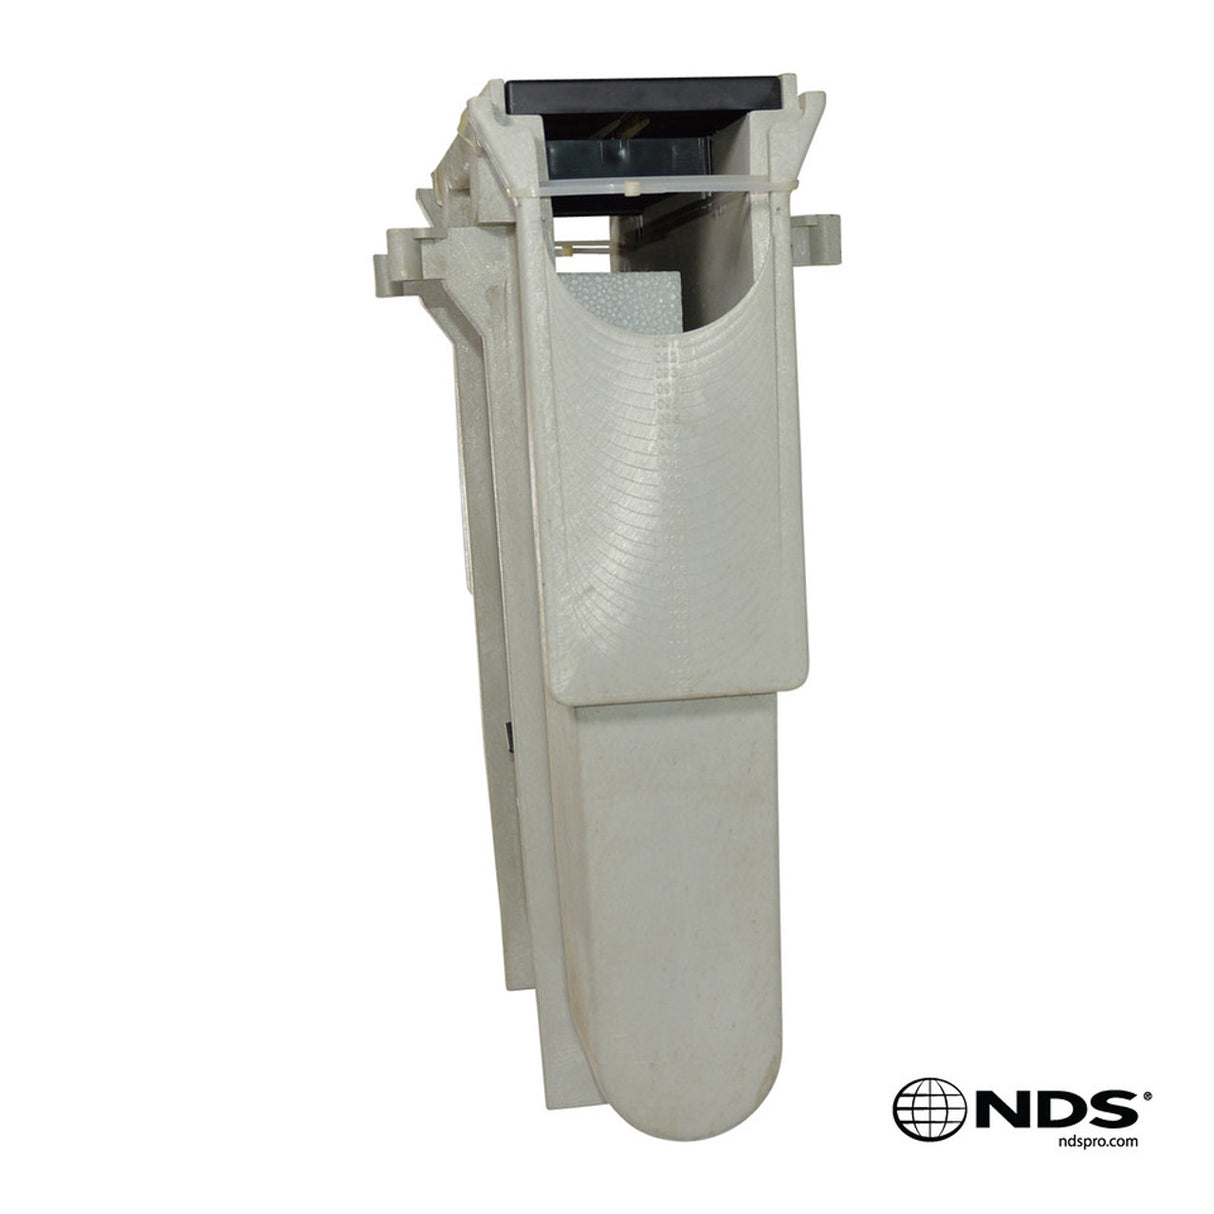 NDS - DS-340 - Dura Slope Catch Basin